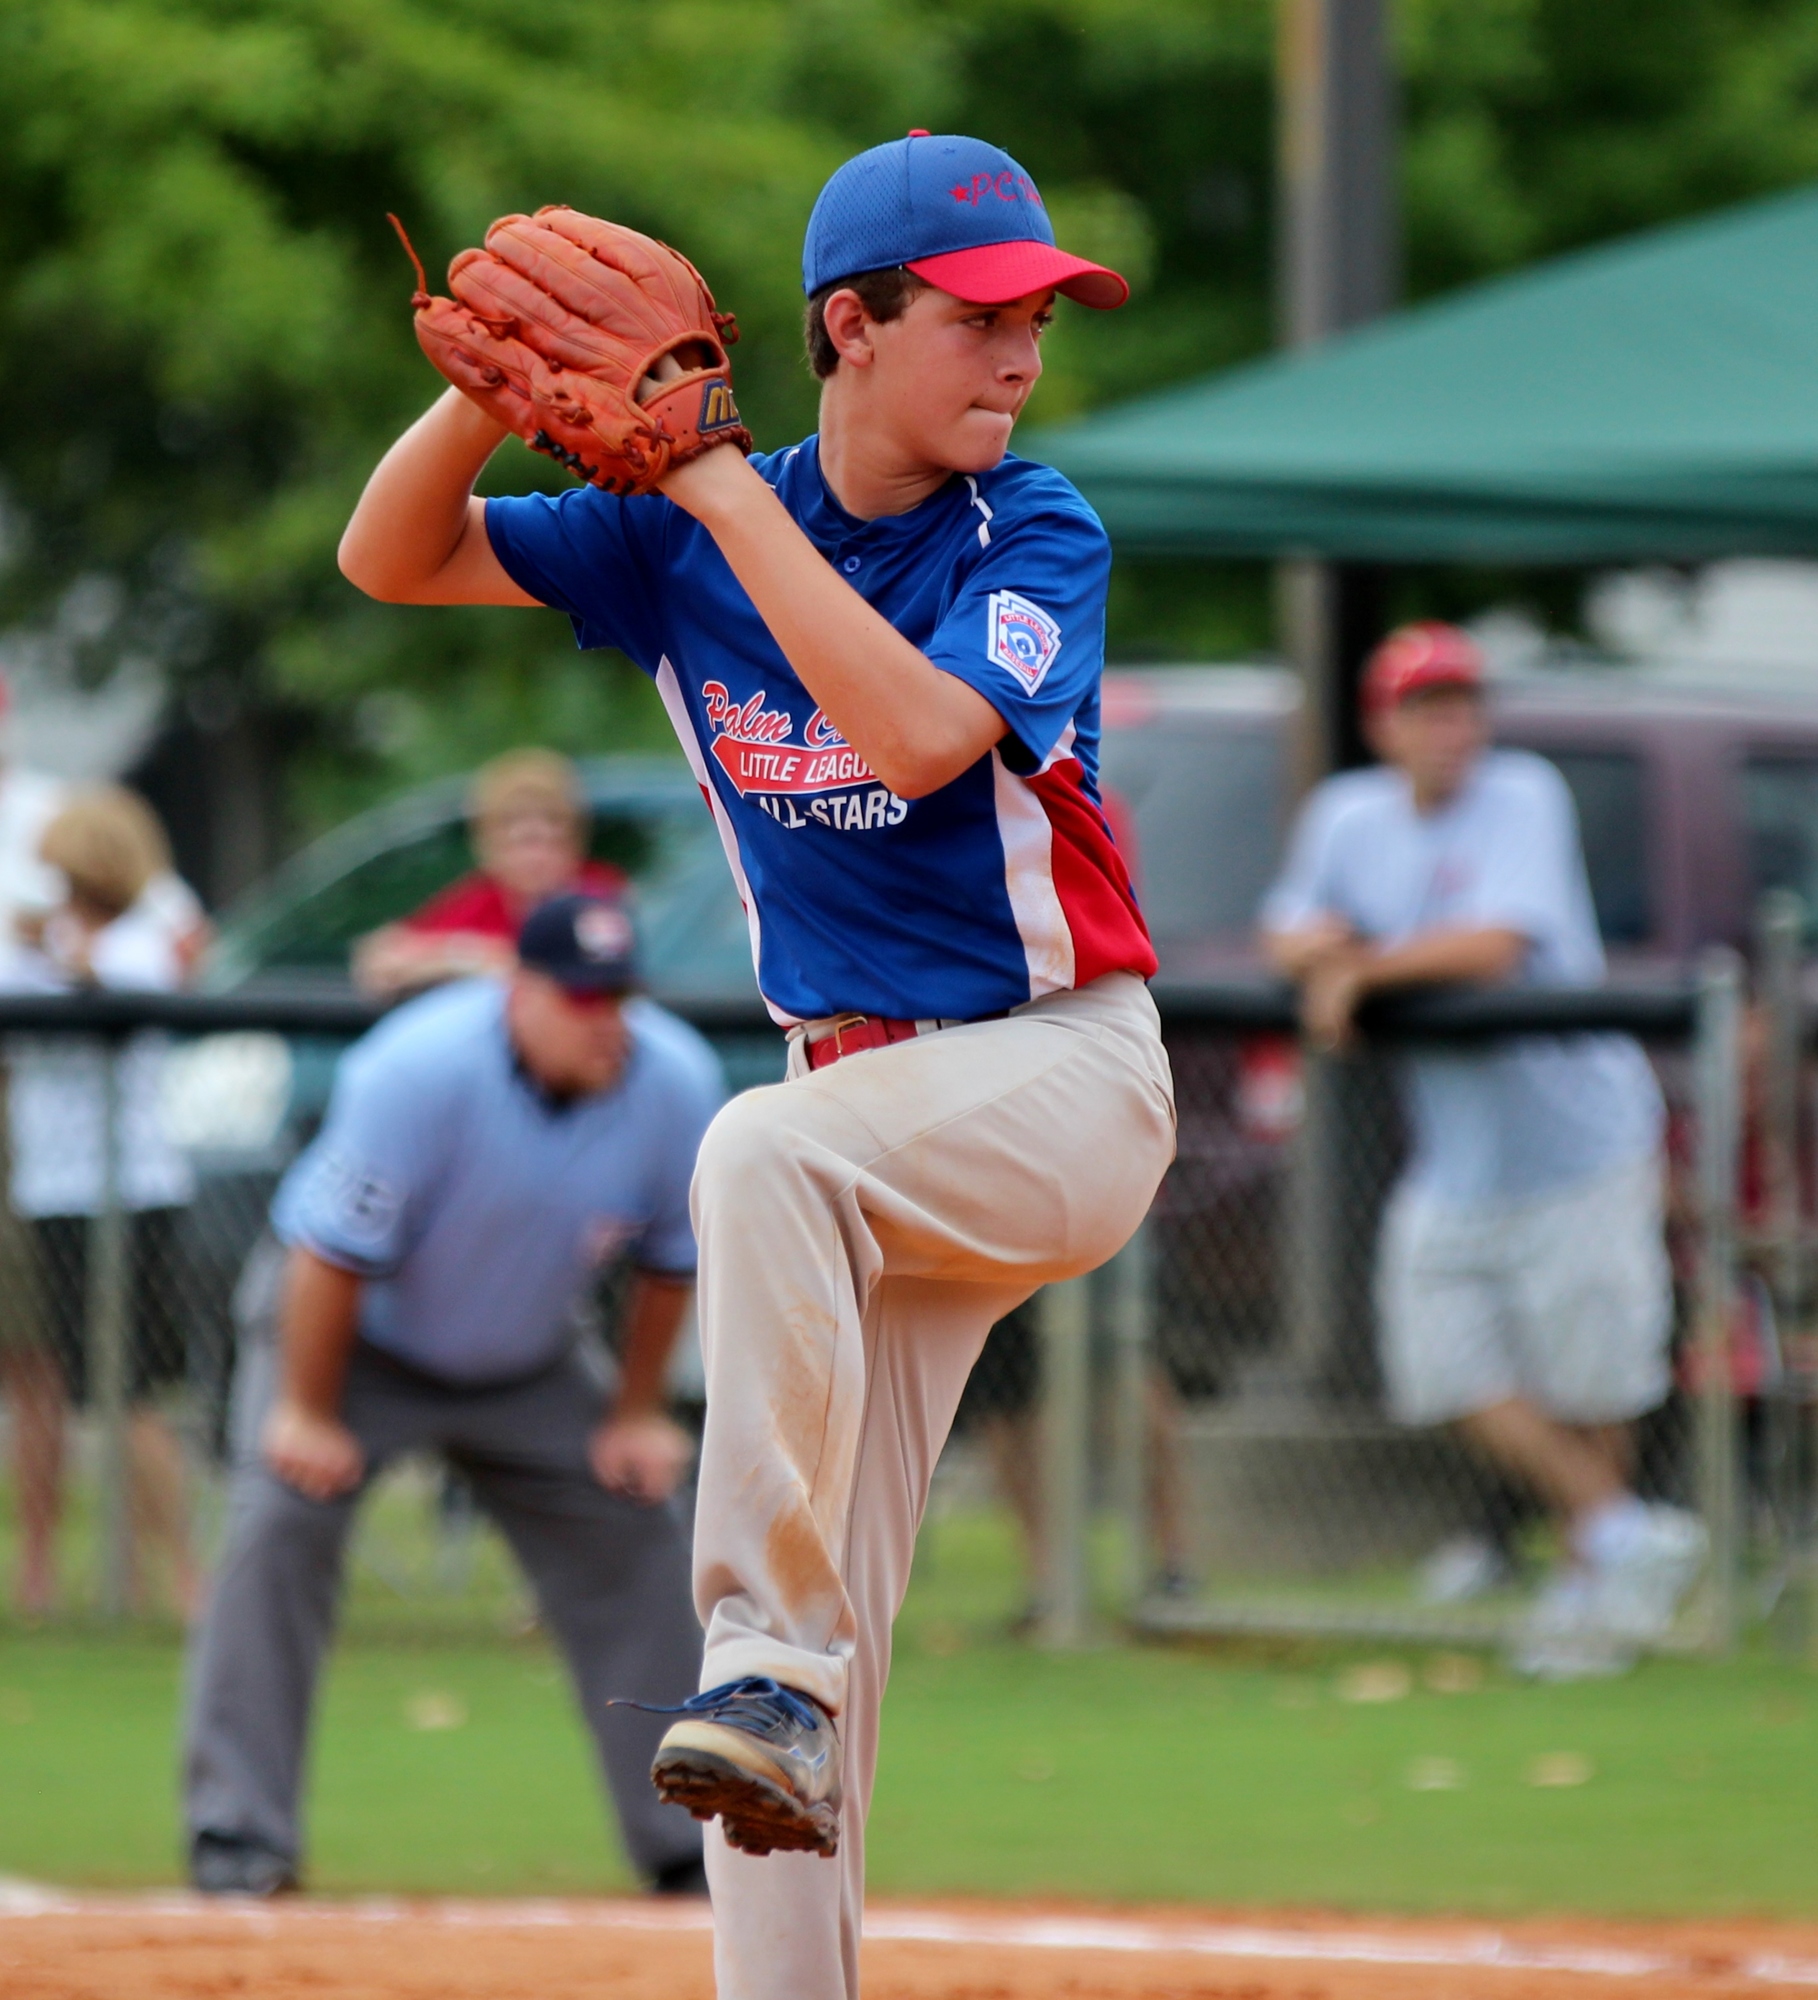 Aedan Celestino pitches in the All-stars' second game of the Florida Little League State tournament.